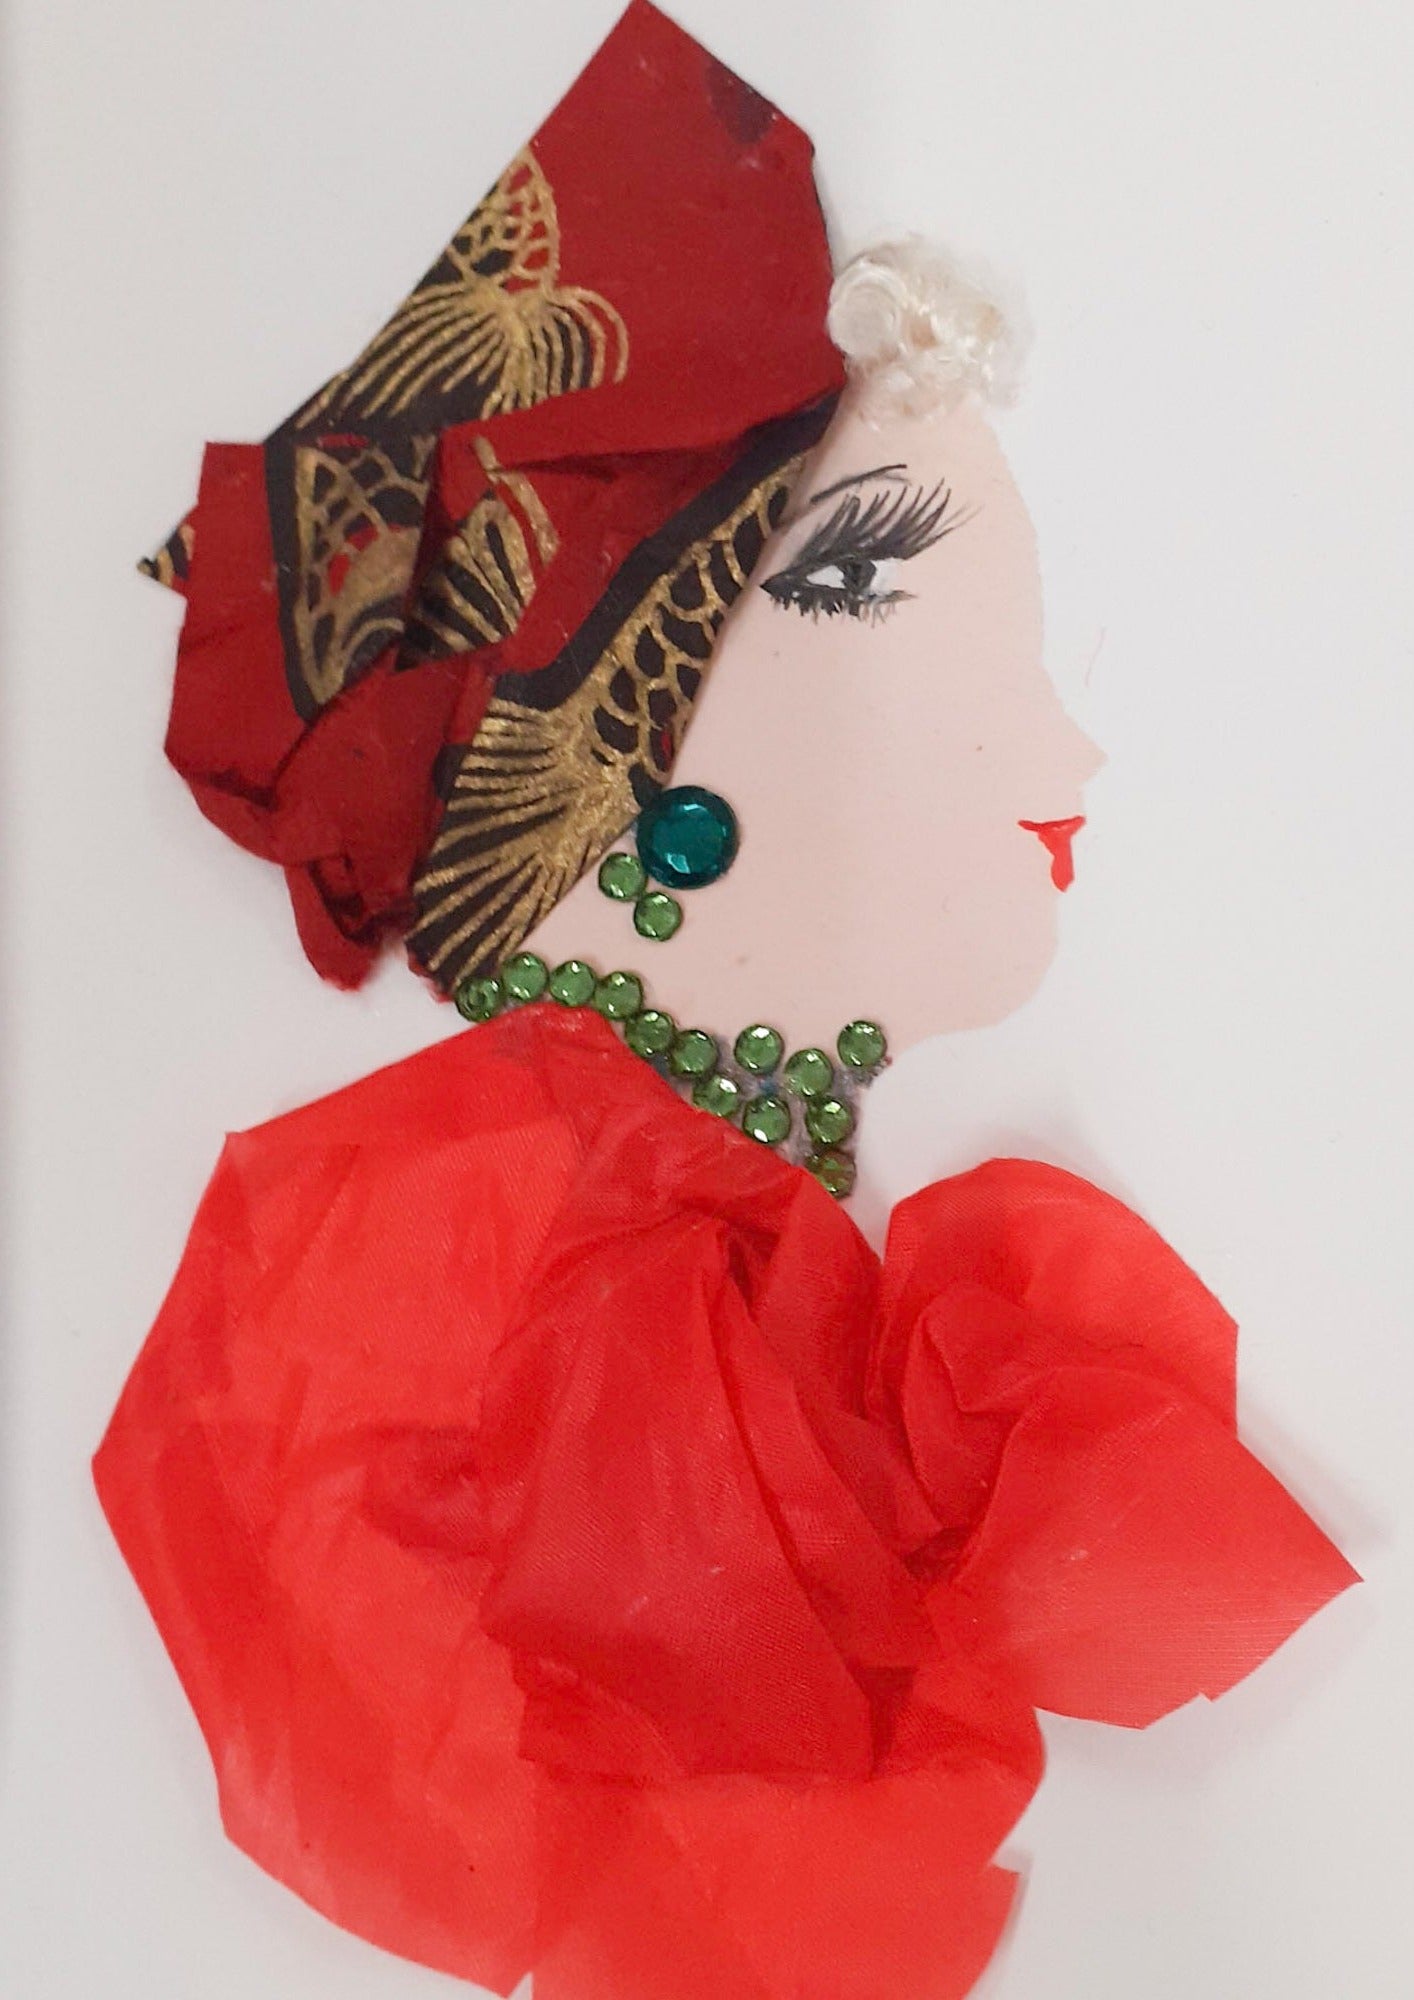 This card was given the name Chelsea Charelene. Chelsea wears a red chiffon dress, a green gem necklace, green earrings, and a red headscrd with a gold koi fish pattern over her platinum blonde curly hair.